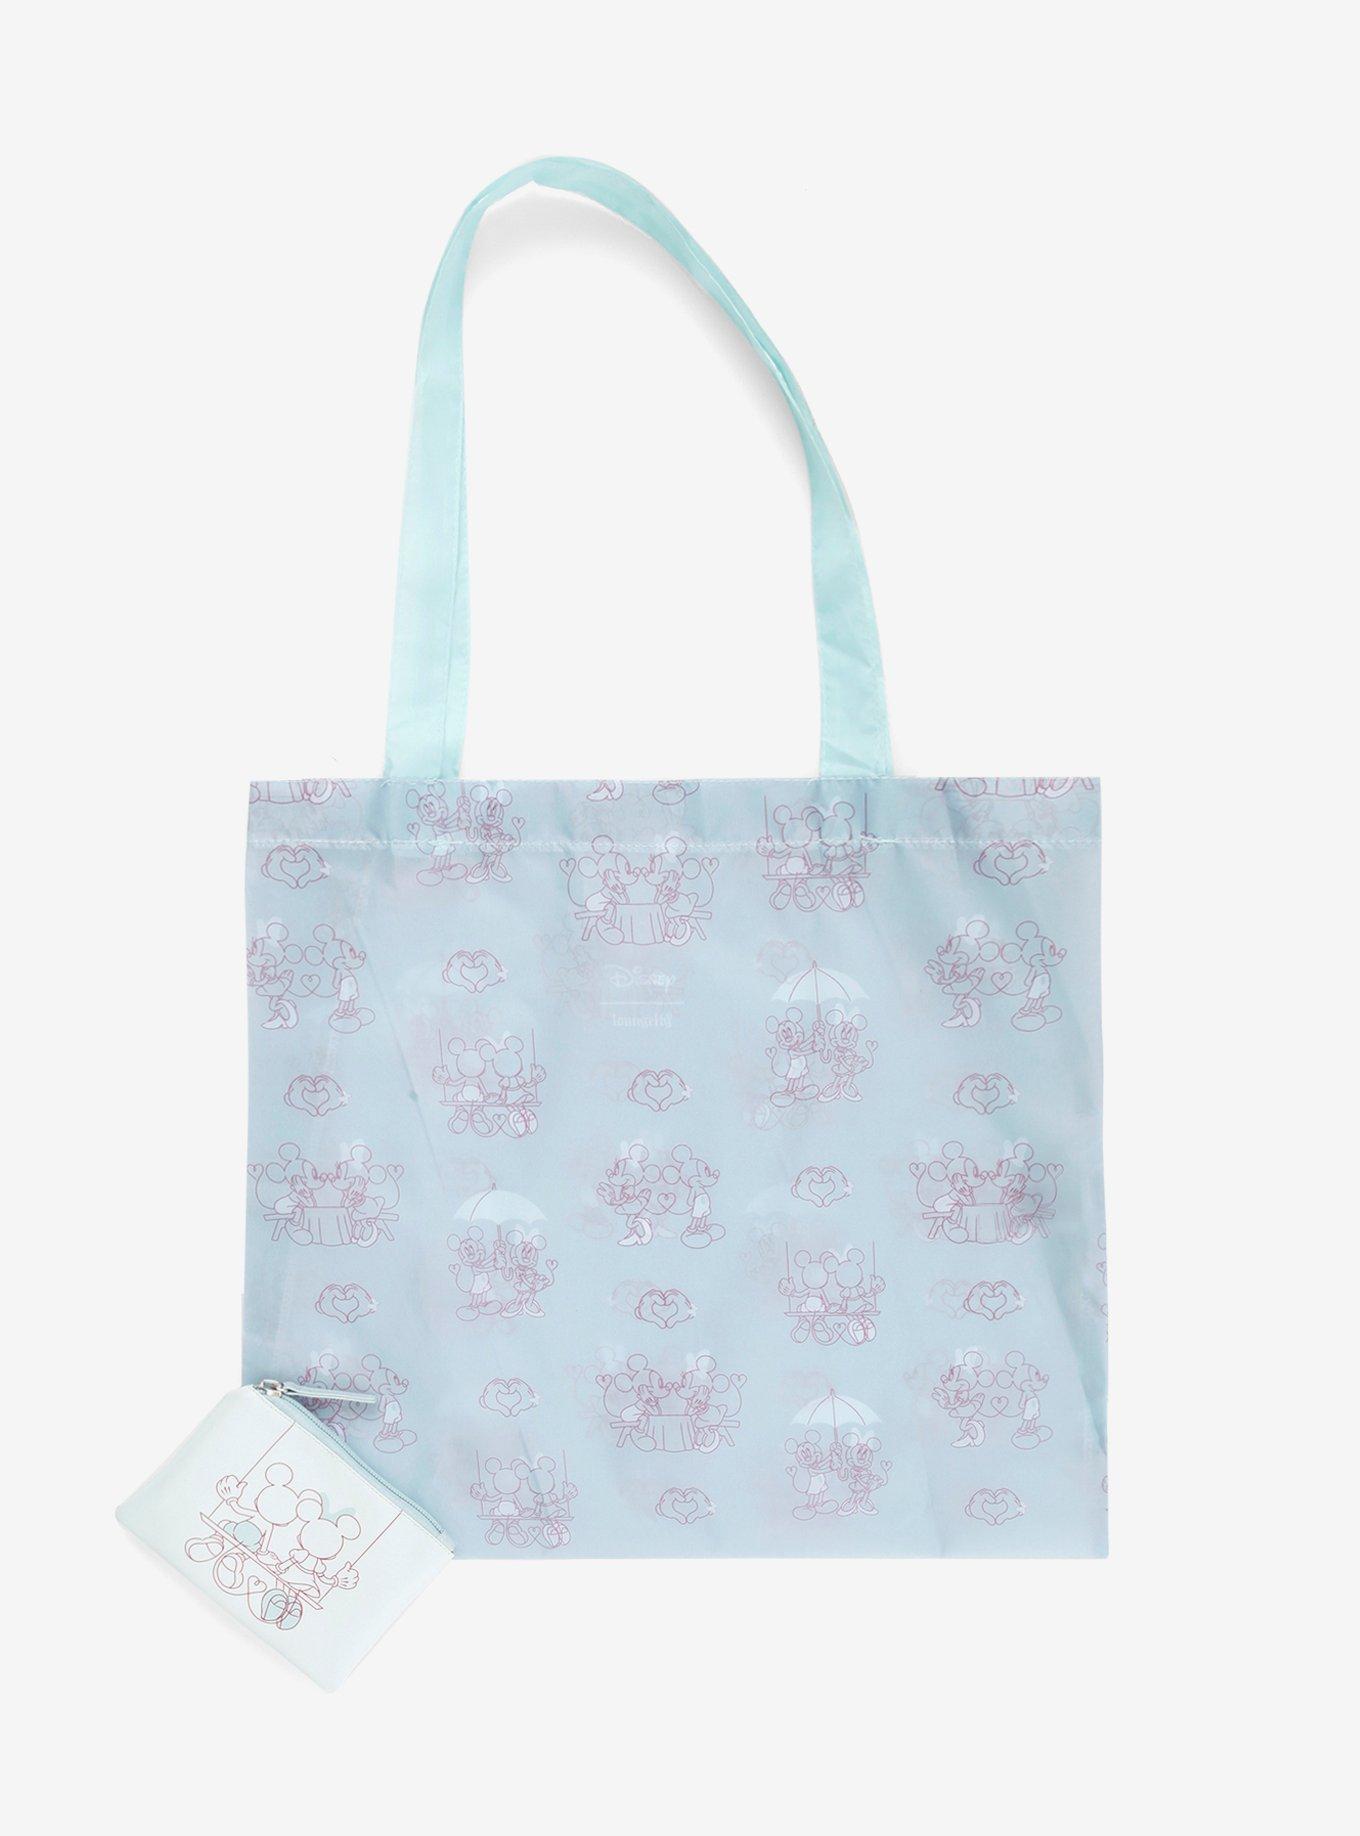 Sanrio Hello Kitty And Friends Reusable Tote Bag : Target